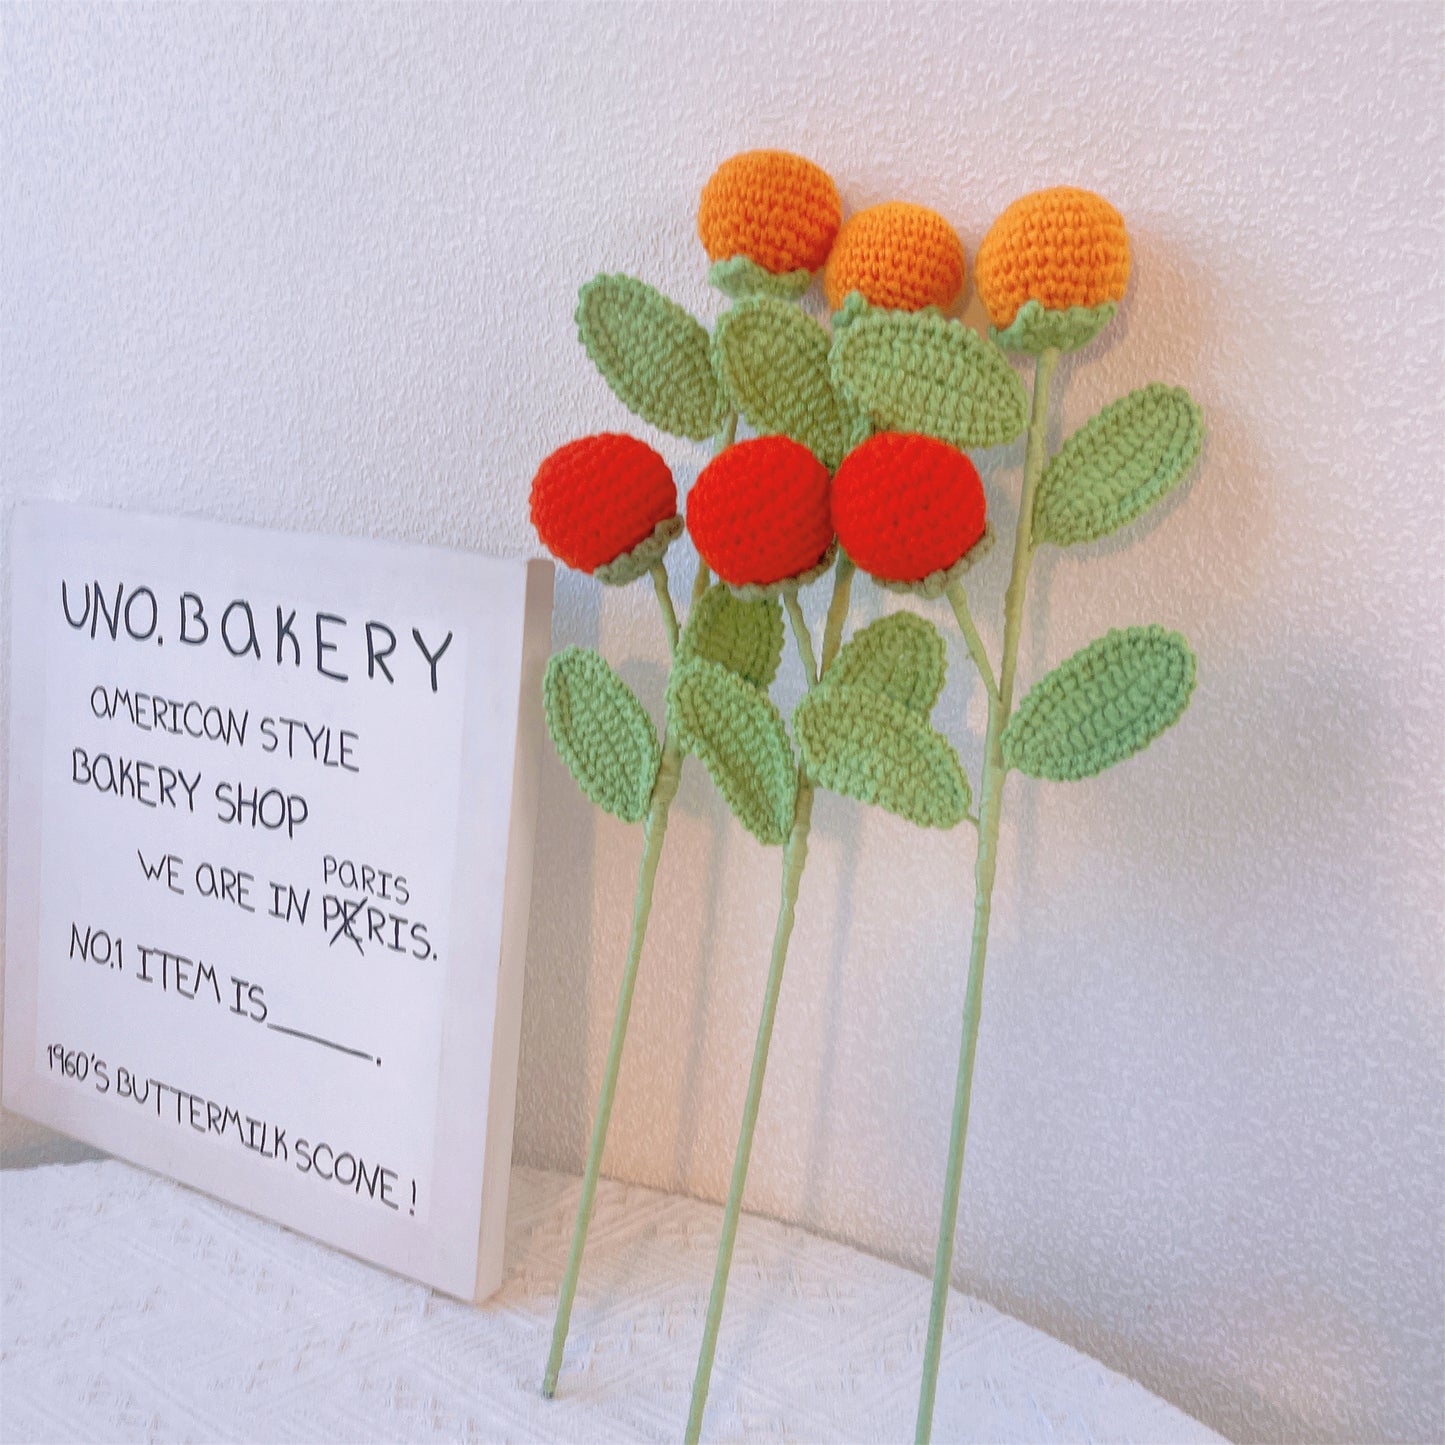 Tangy Tangerine Twist: Handcrafted Crochet Tangerine Stake for a Playful Garden Decor